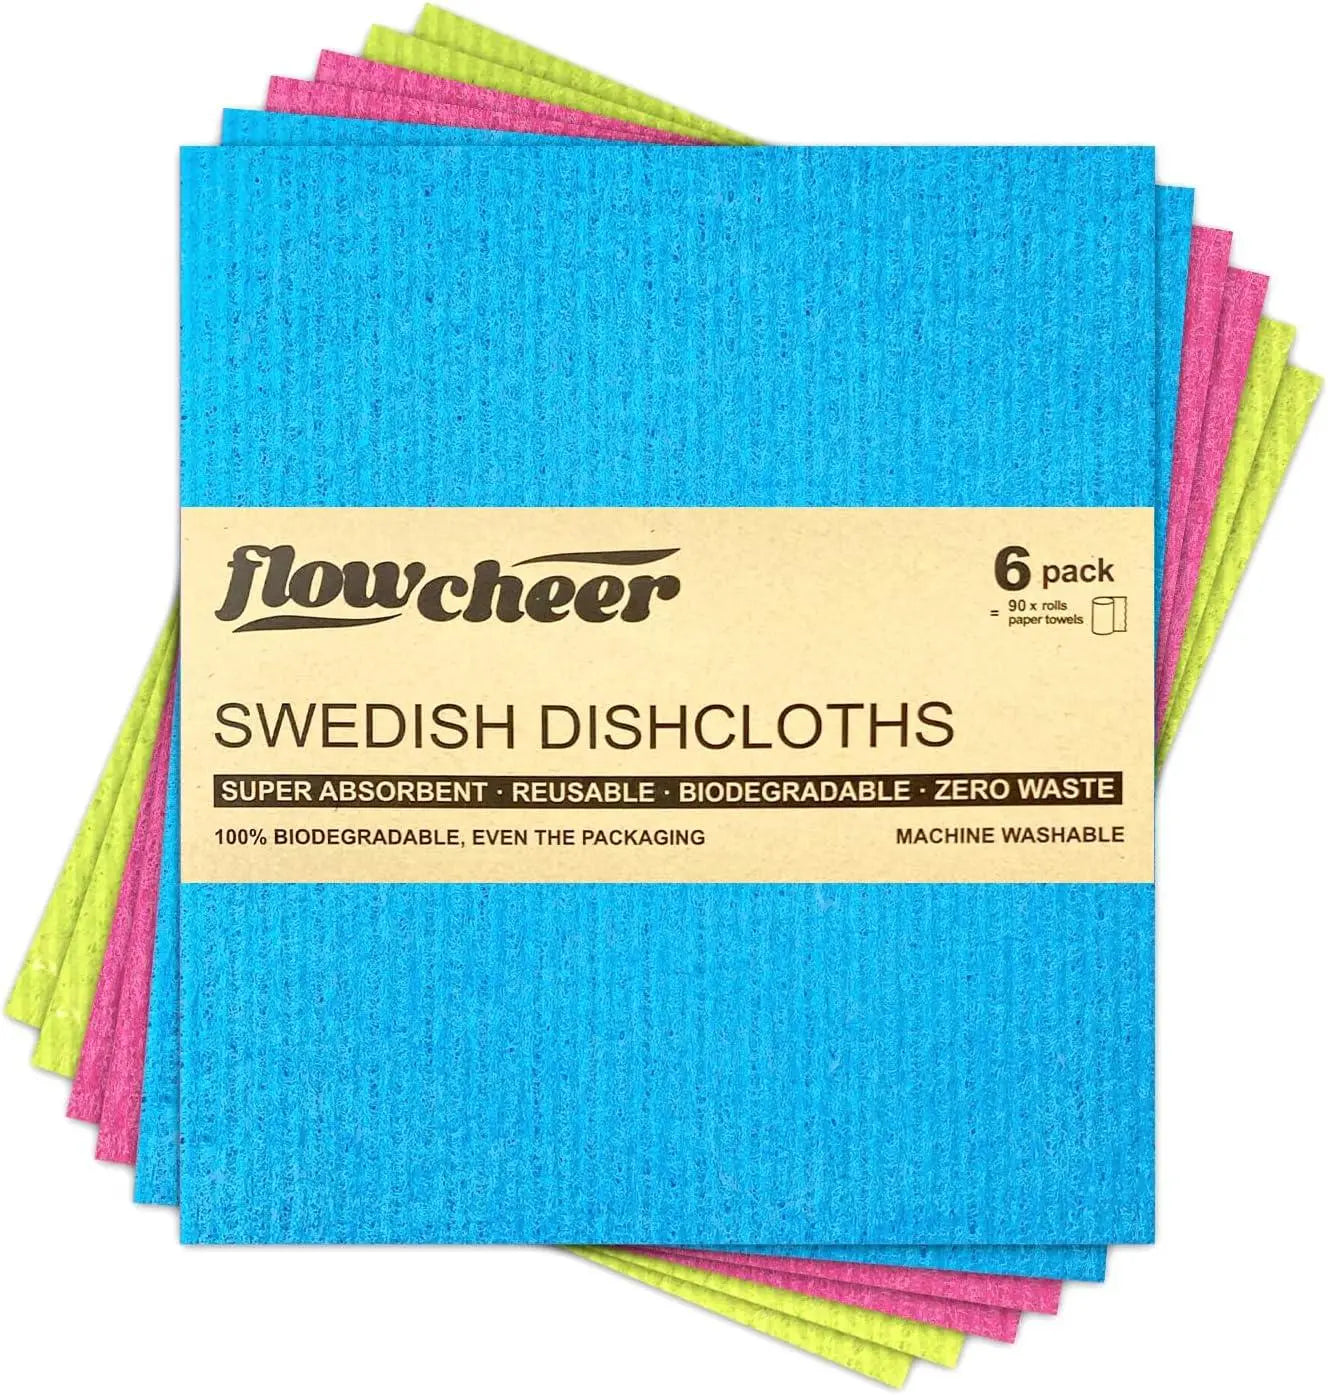 Flowcheer Swedish Dishcloths - Reusable Kitchen Paper Towels, 6 Pack - Washable Cleaning Cloths - Multicolor - Washable Sponge Towel for Cleaning